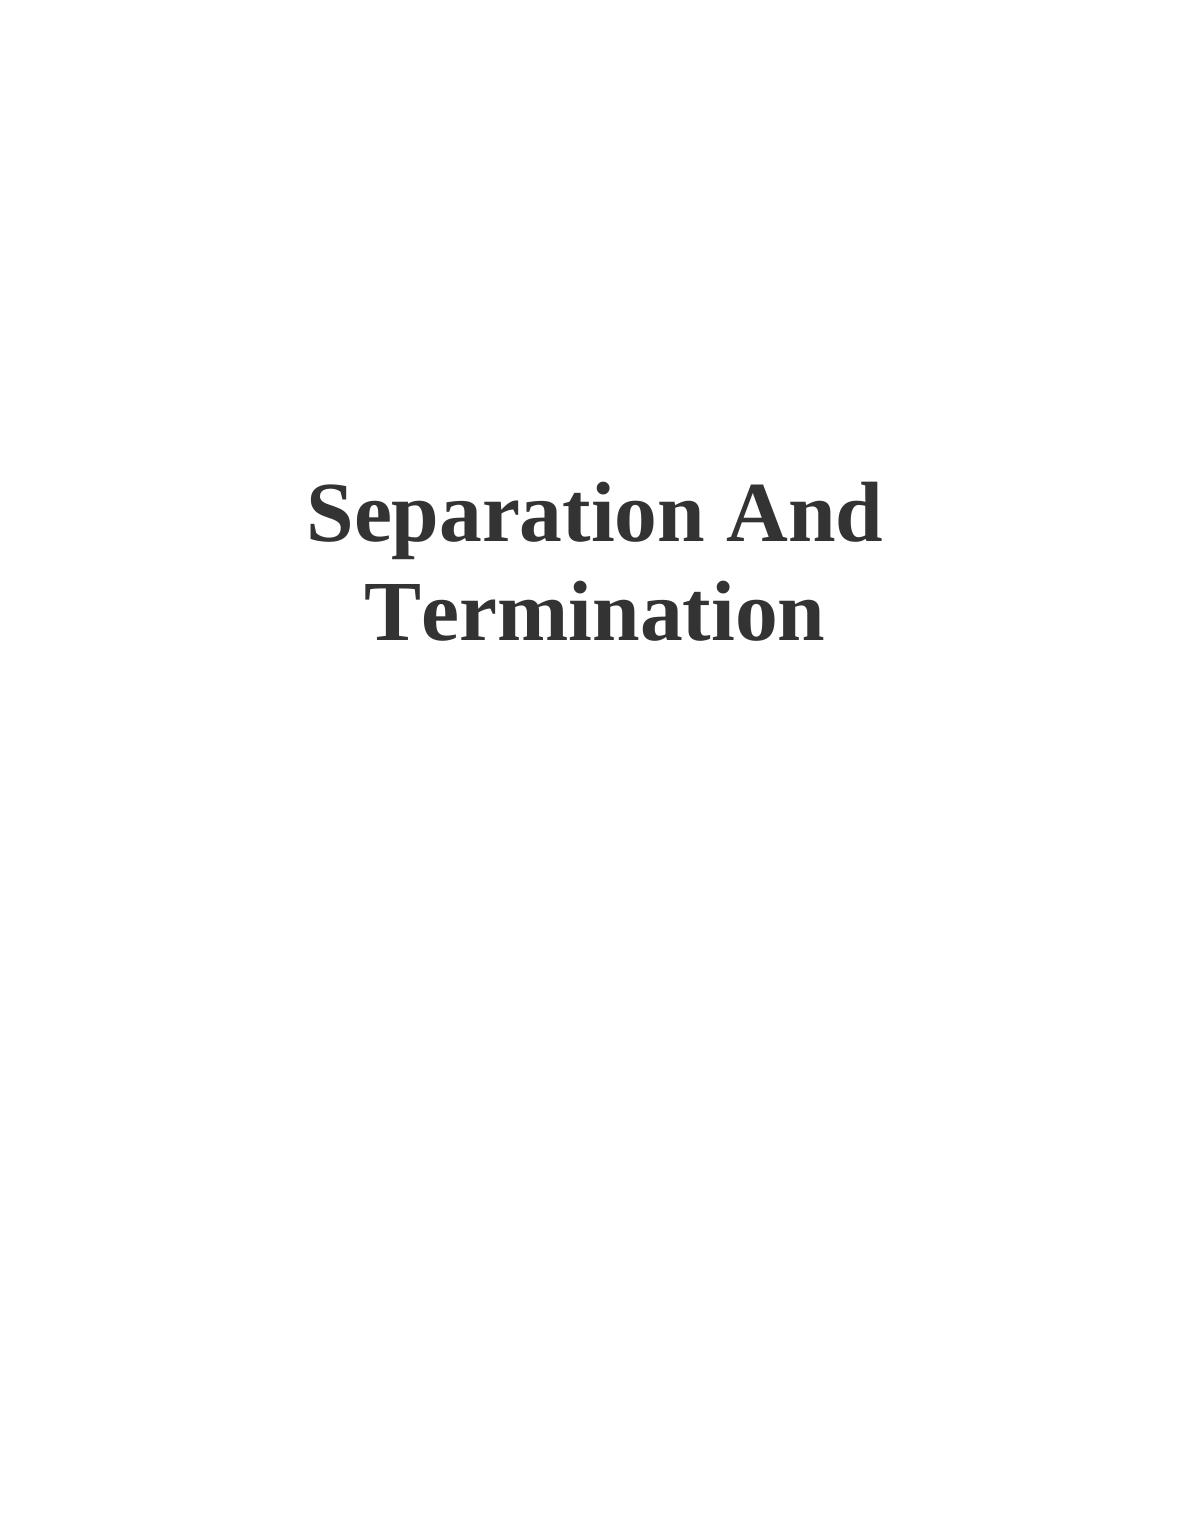 Separation And Termination_1